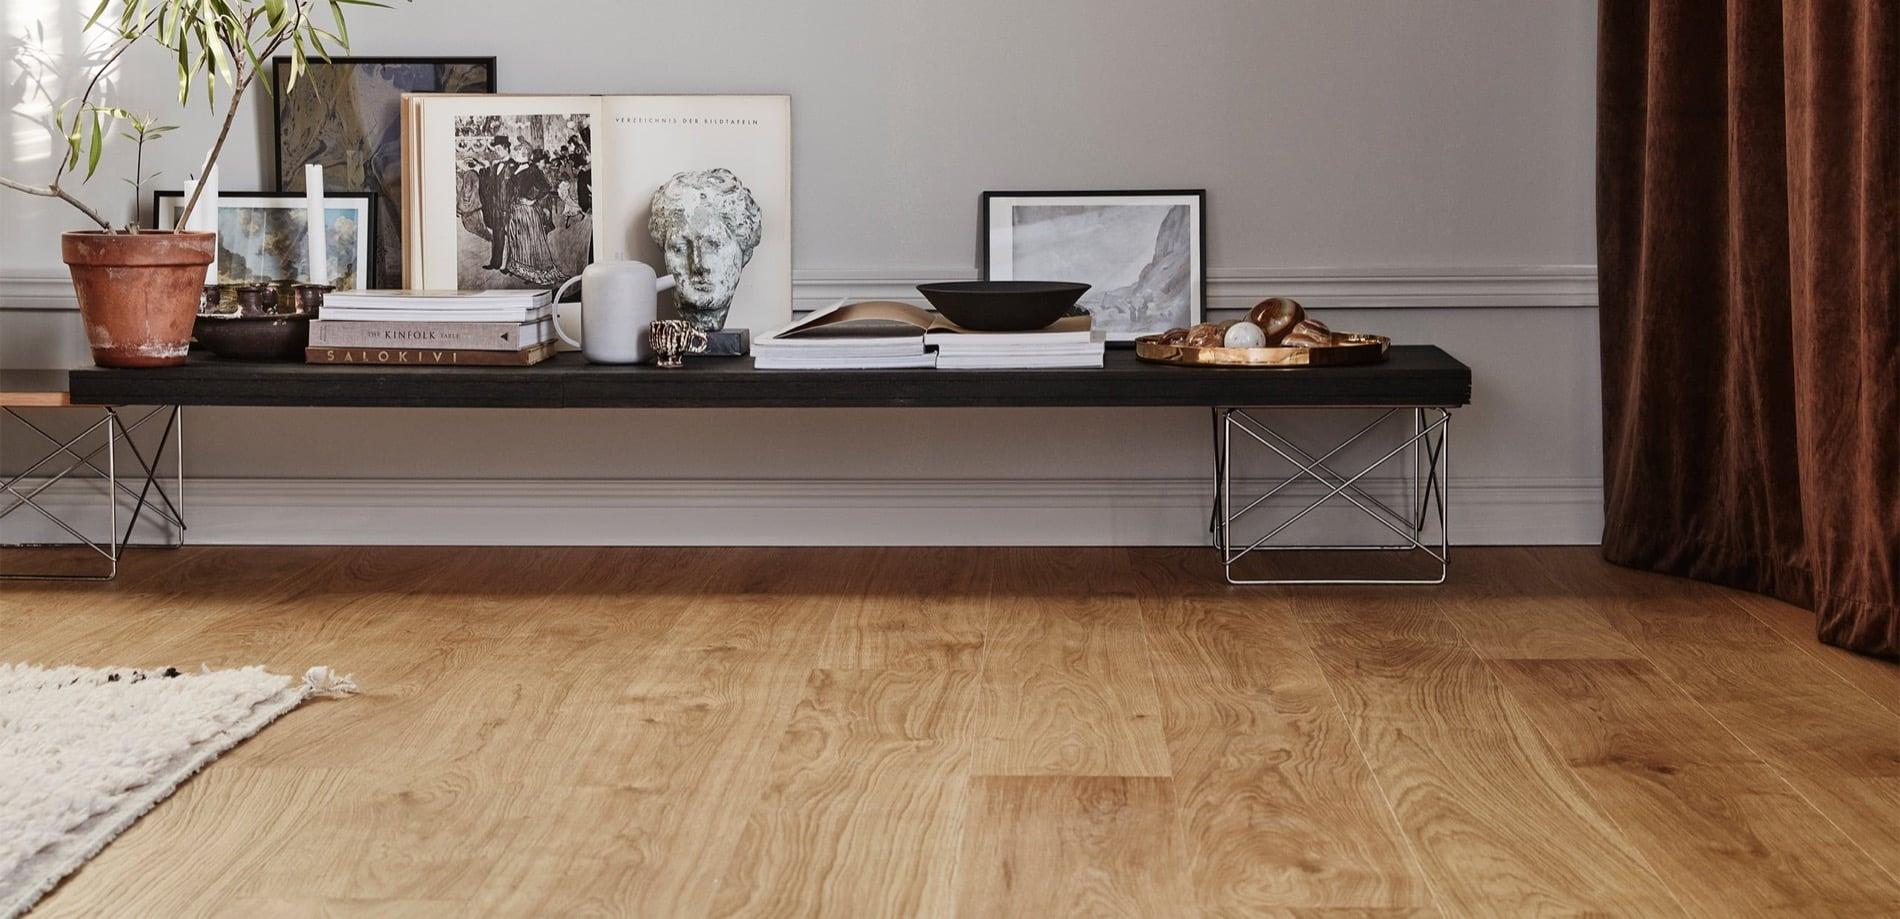 Seasonal Expansion and Shrinkage in Hardwood Floors - Impressions Flooring  Collection